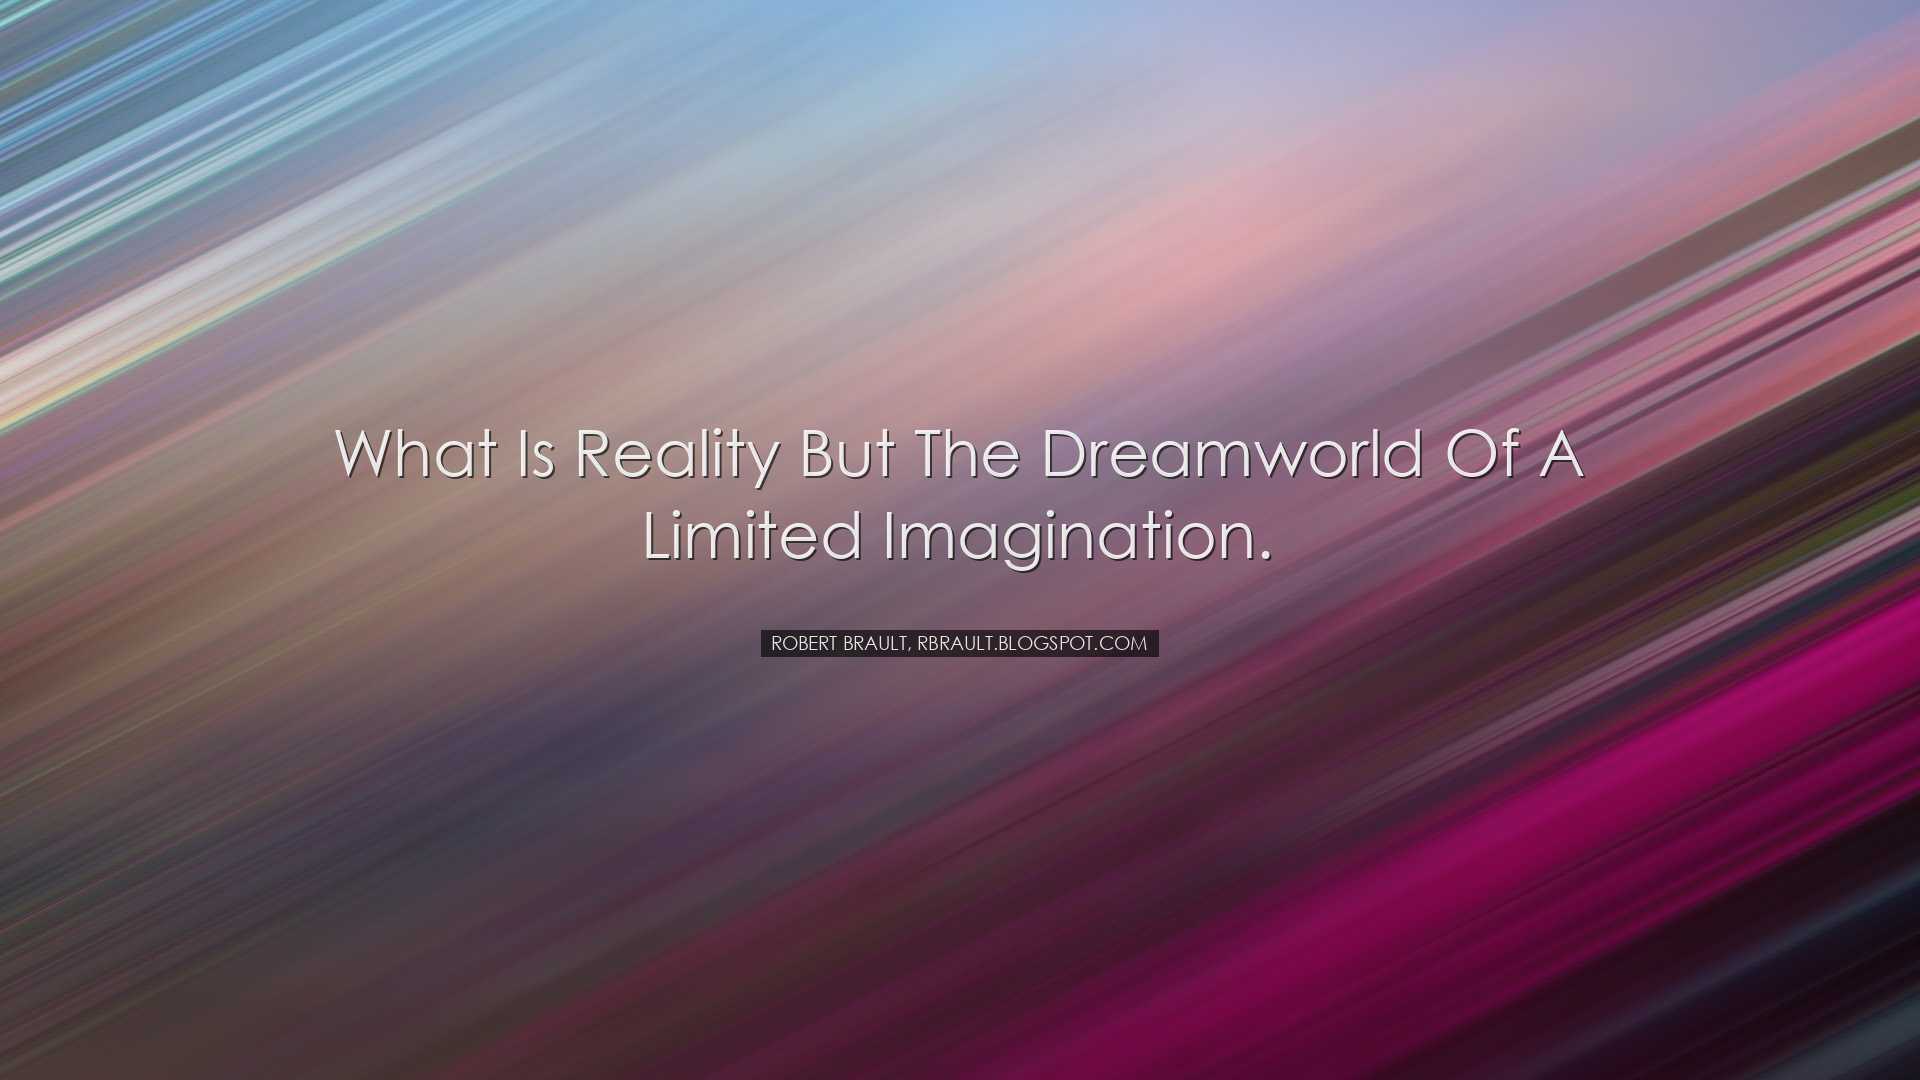 What is reality but the dreamworld of a limited imagination. - Rob